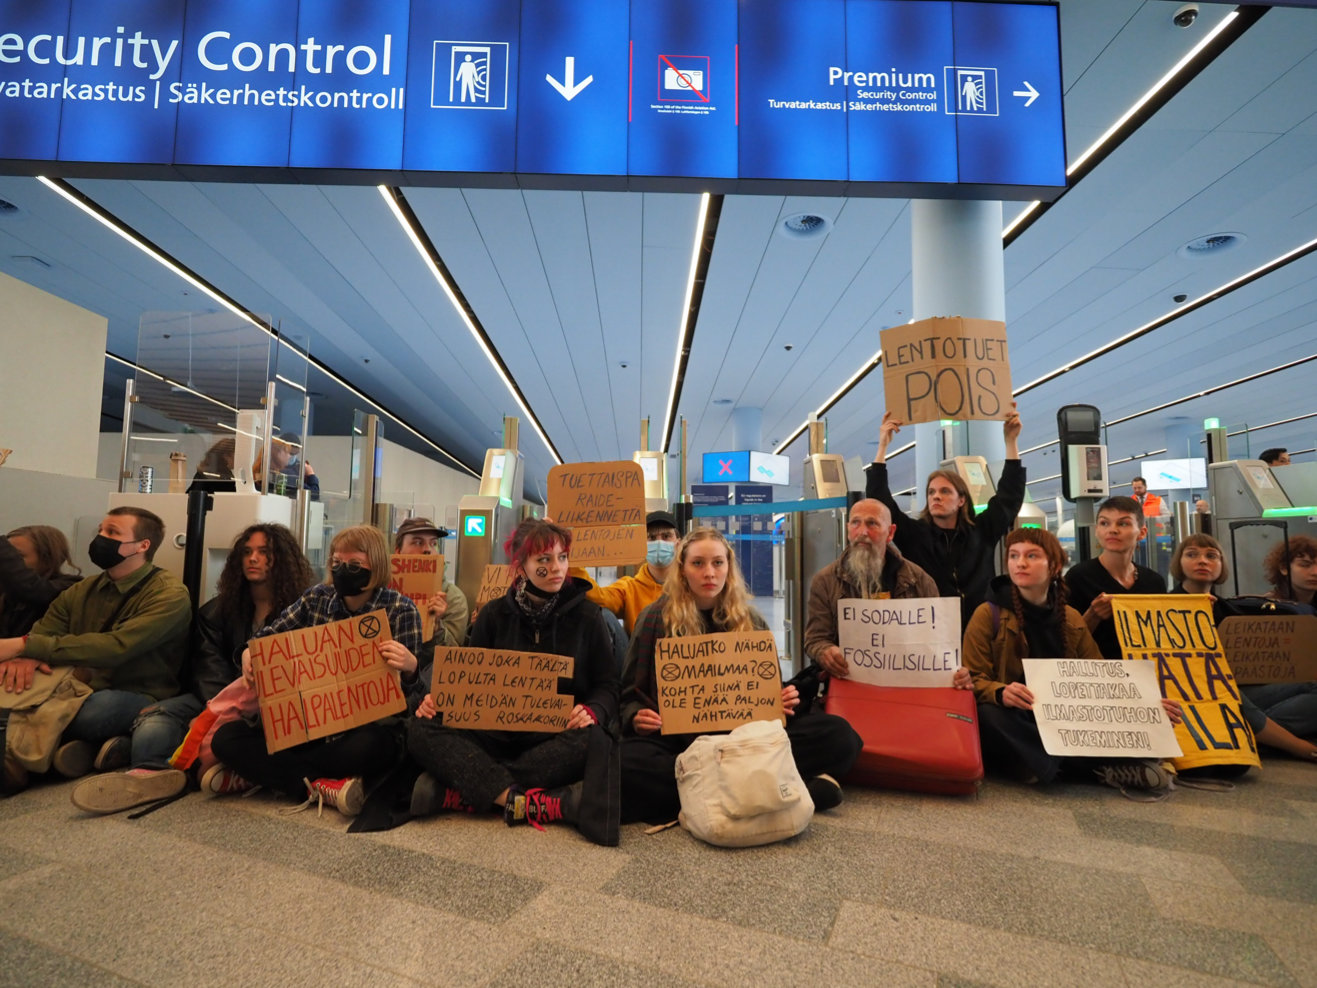 Young and older rebels holding placards sit on floor to block entrance to Security Control at airport